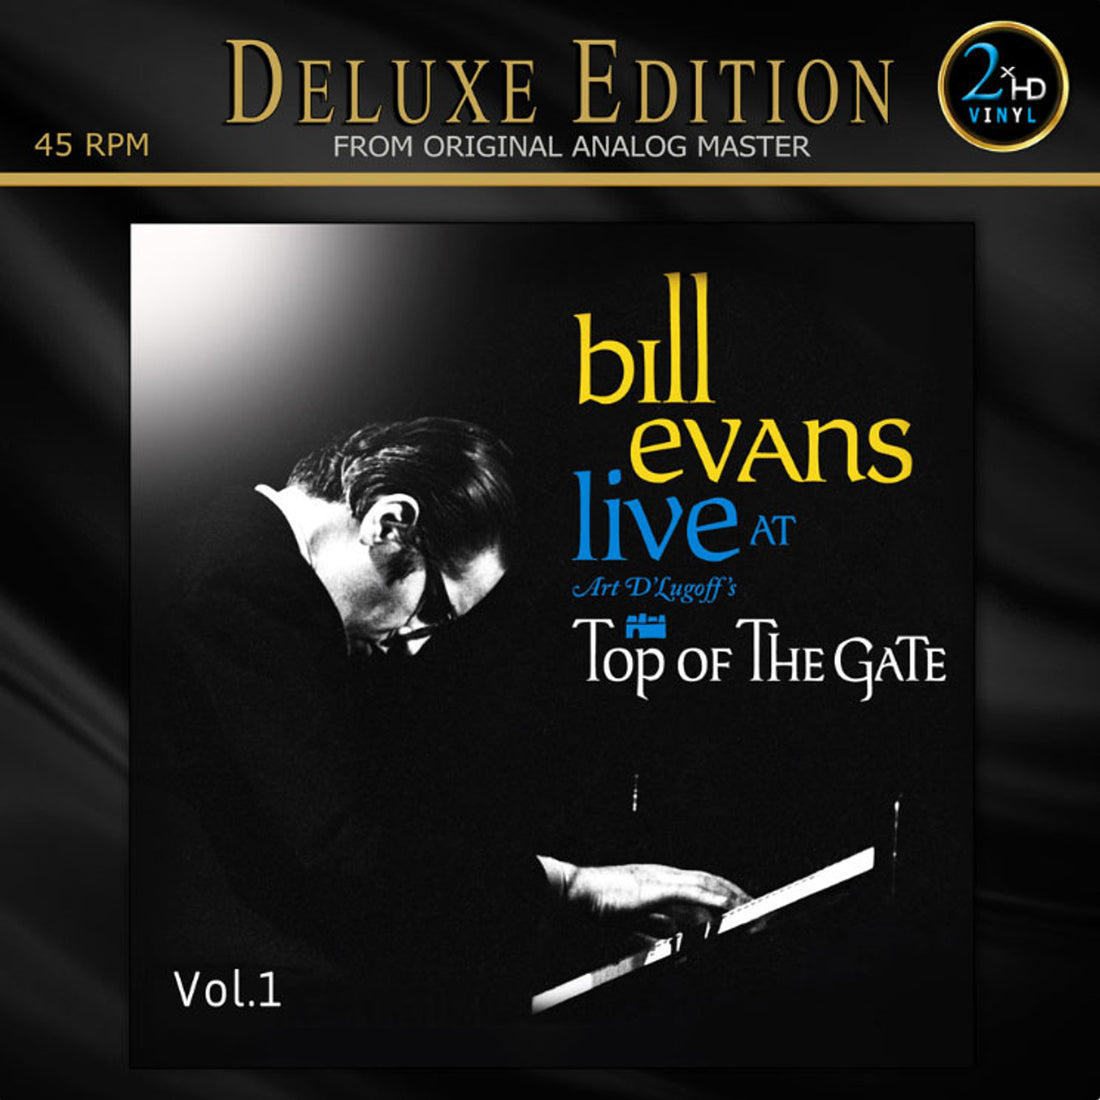 Bill Evans | Top of the Gate Vol. 1